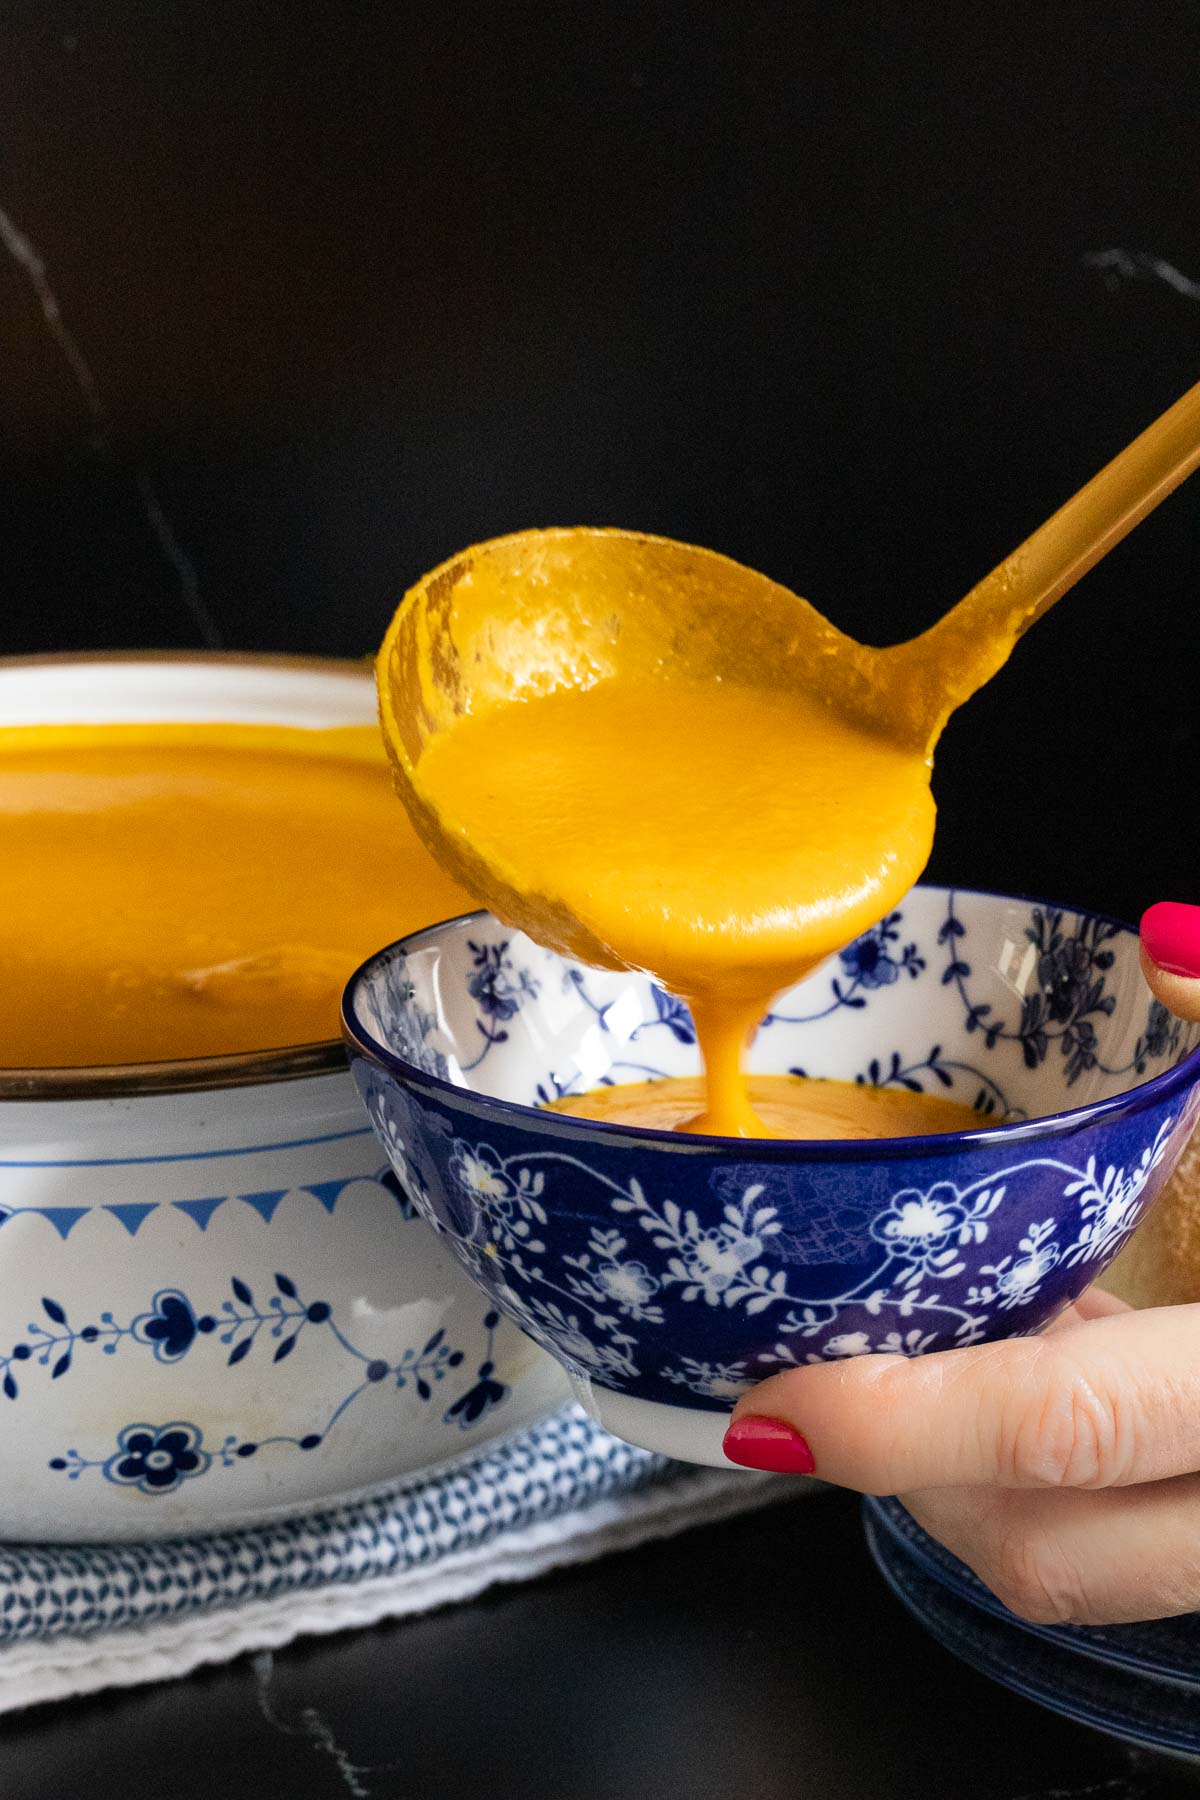 Vertical closeup photo of a person pouring Red Lentil Carrot Ginger Soup into a blue and white patterned individual serving bowl.